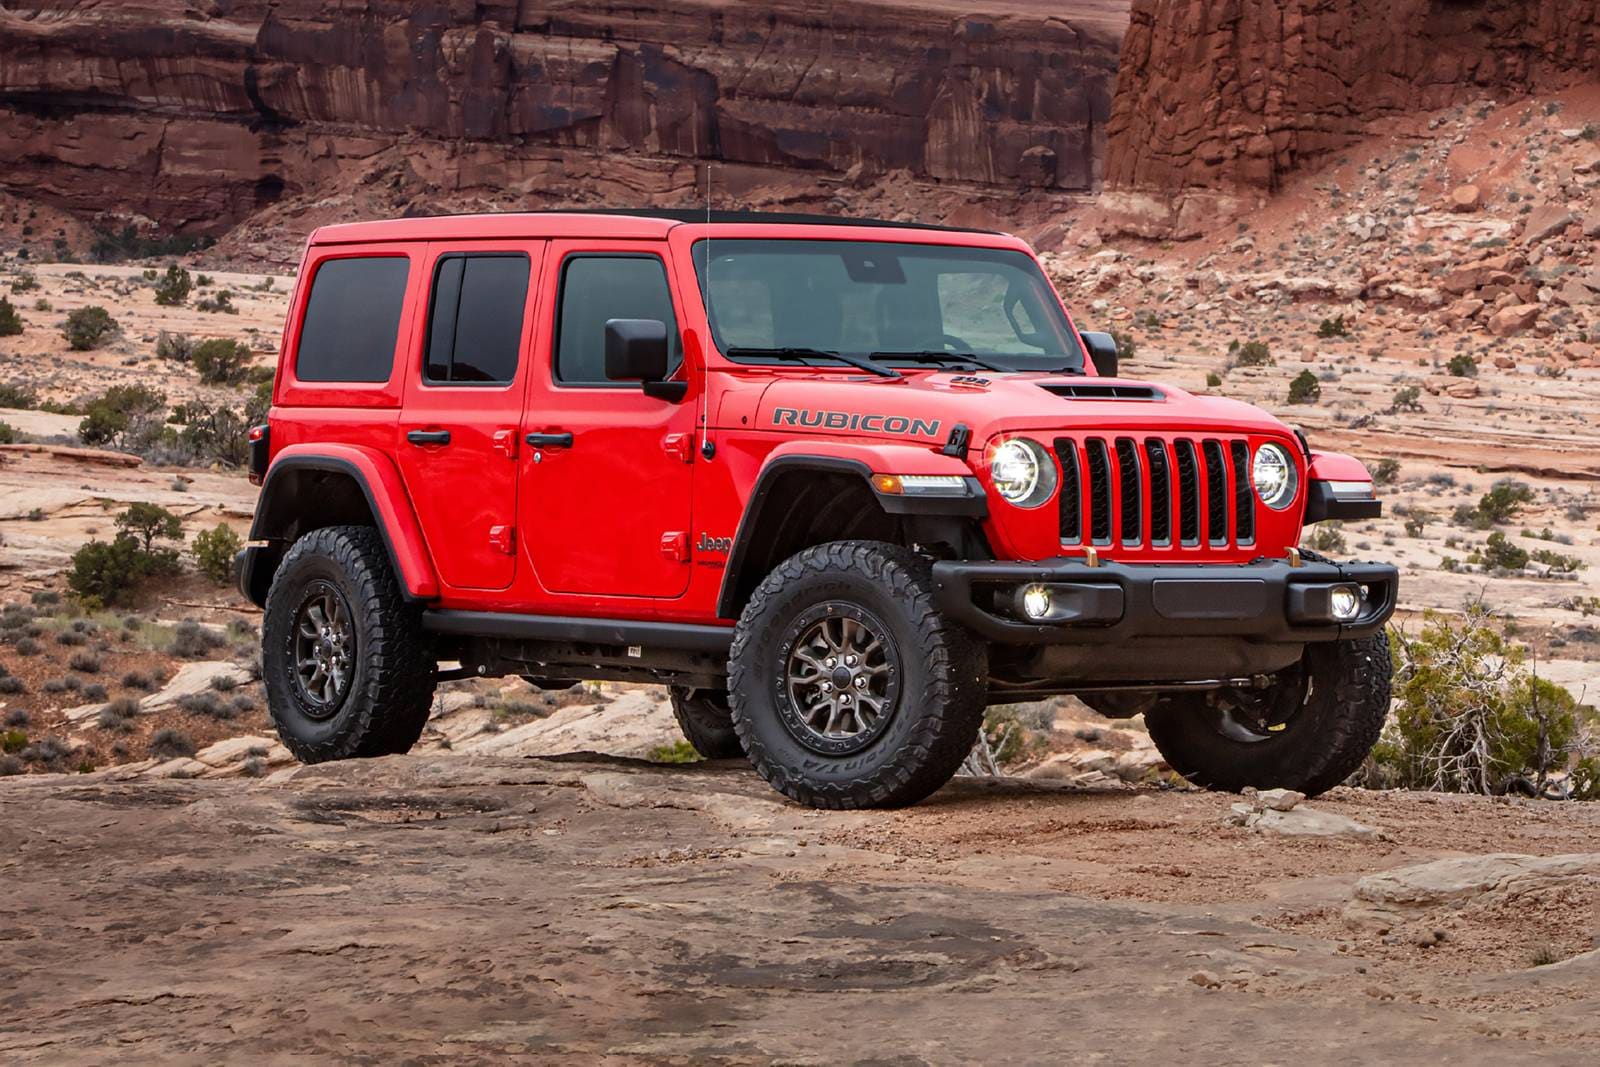 Used 2021 Jeep Wrangler Unlimited Rubicon 392 Review | Edmunds